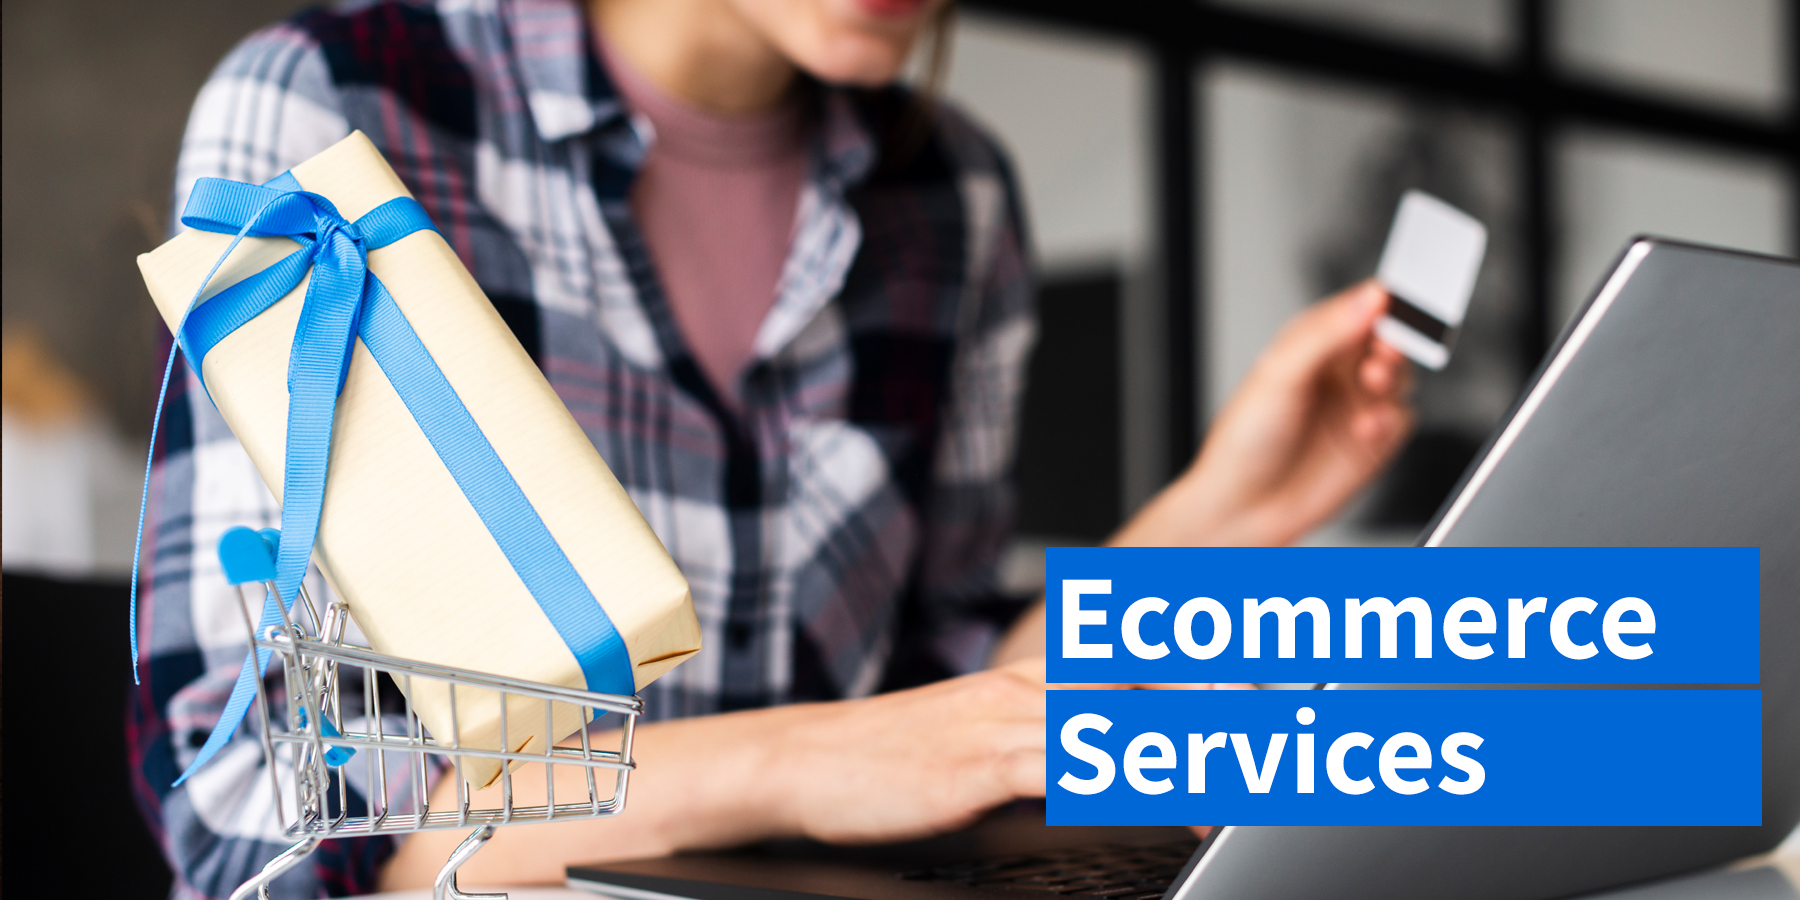 vserve | Stay Informed: The Latest News in the World of Ecommerce Services